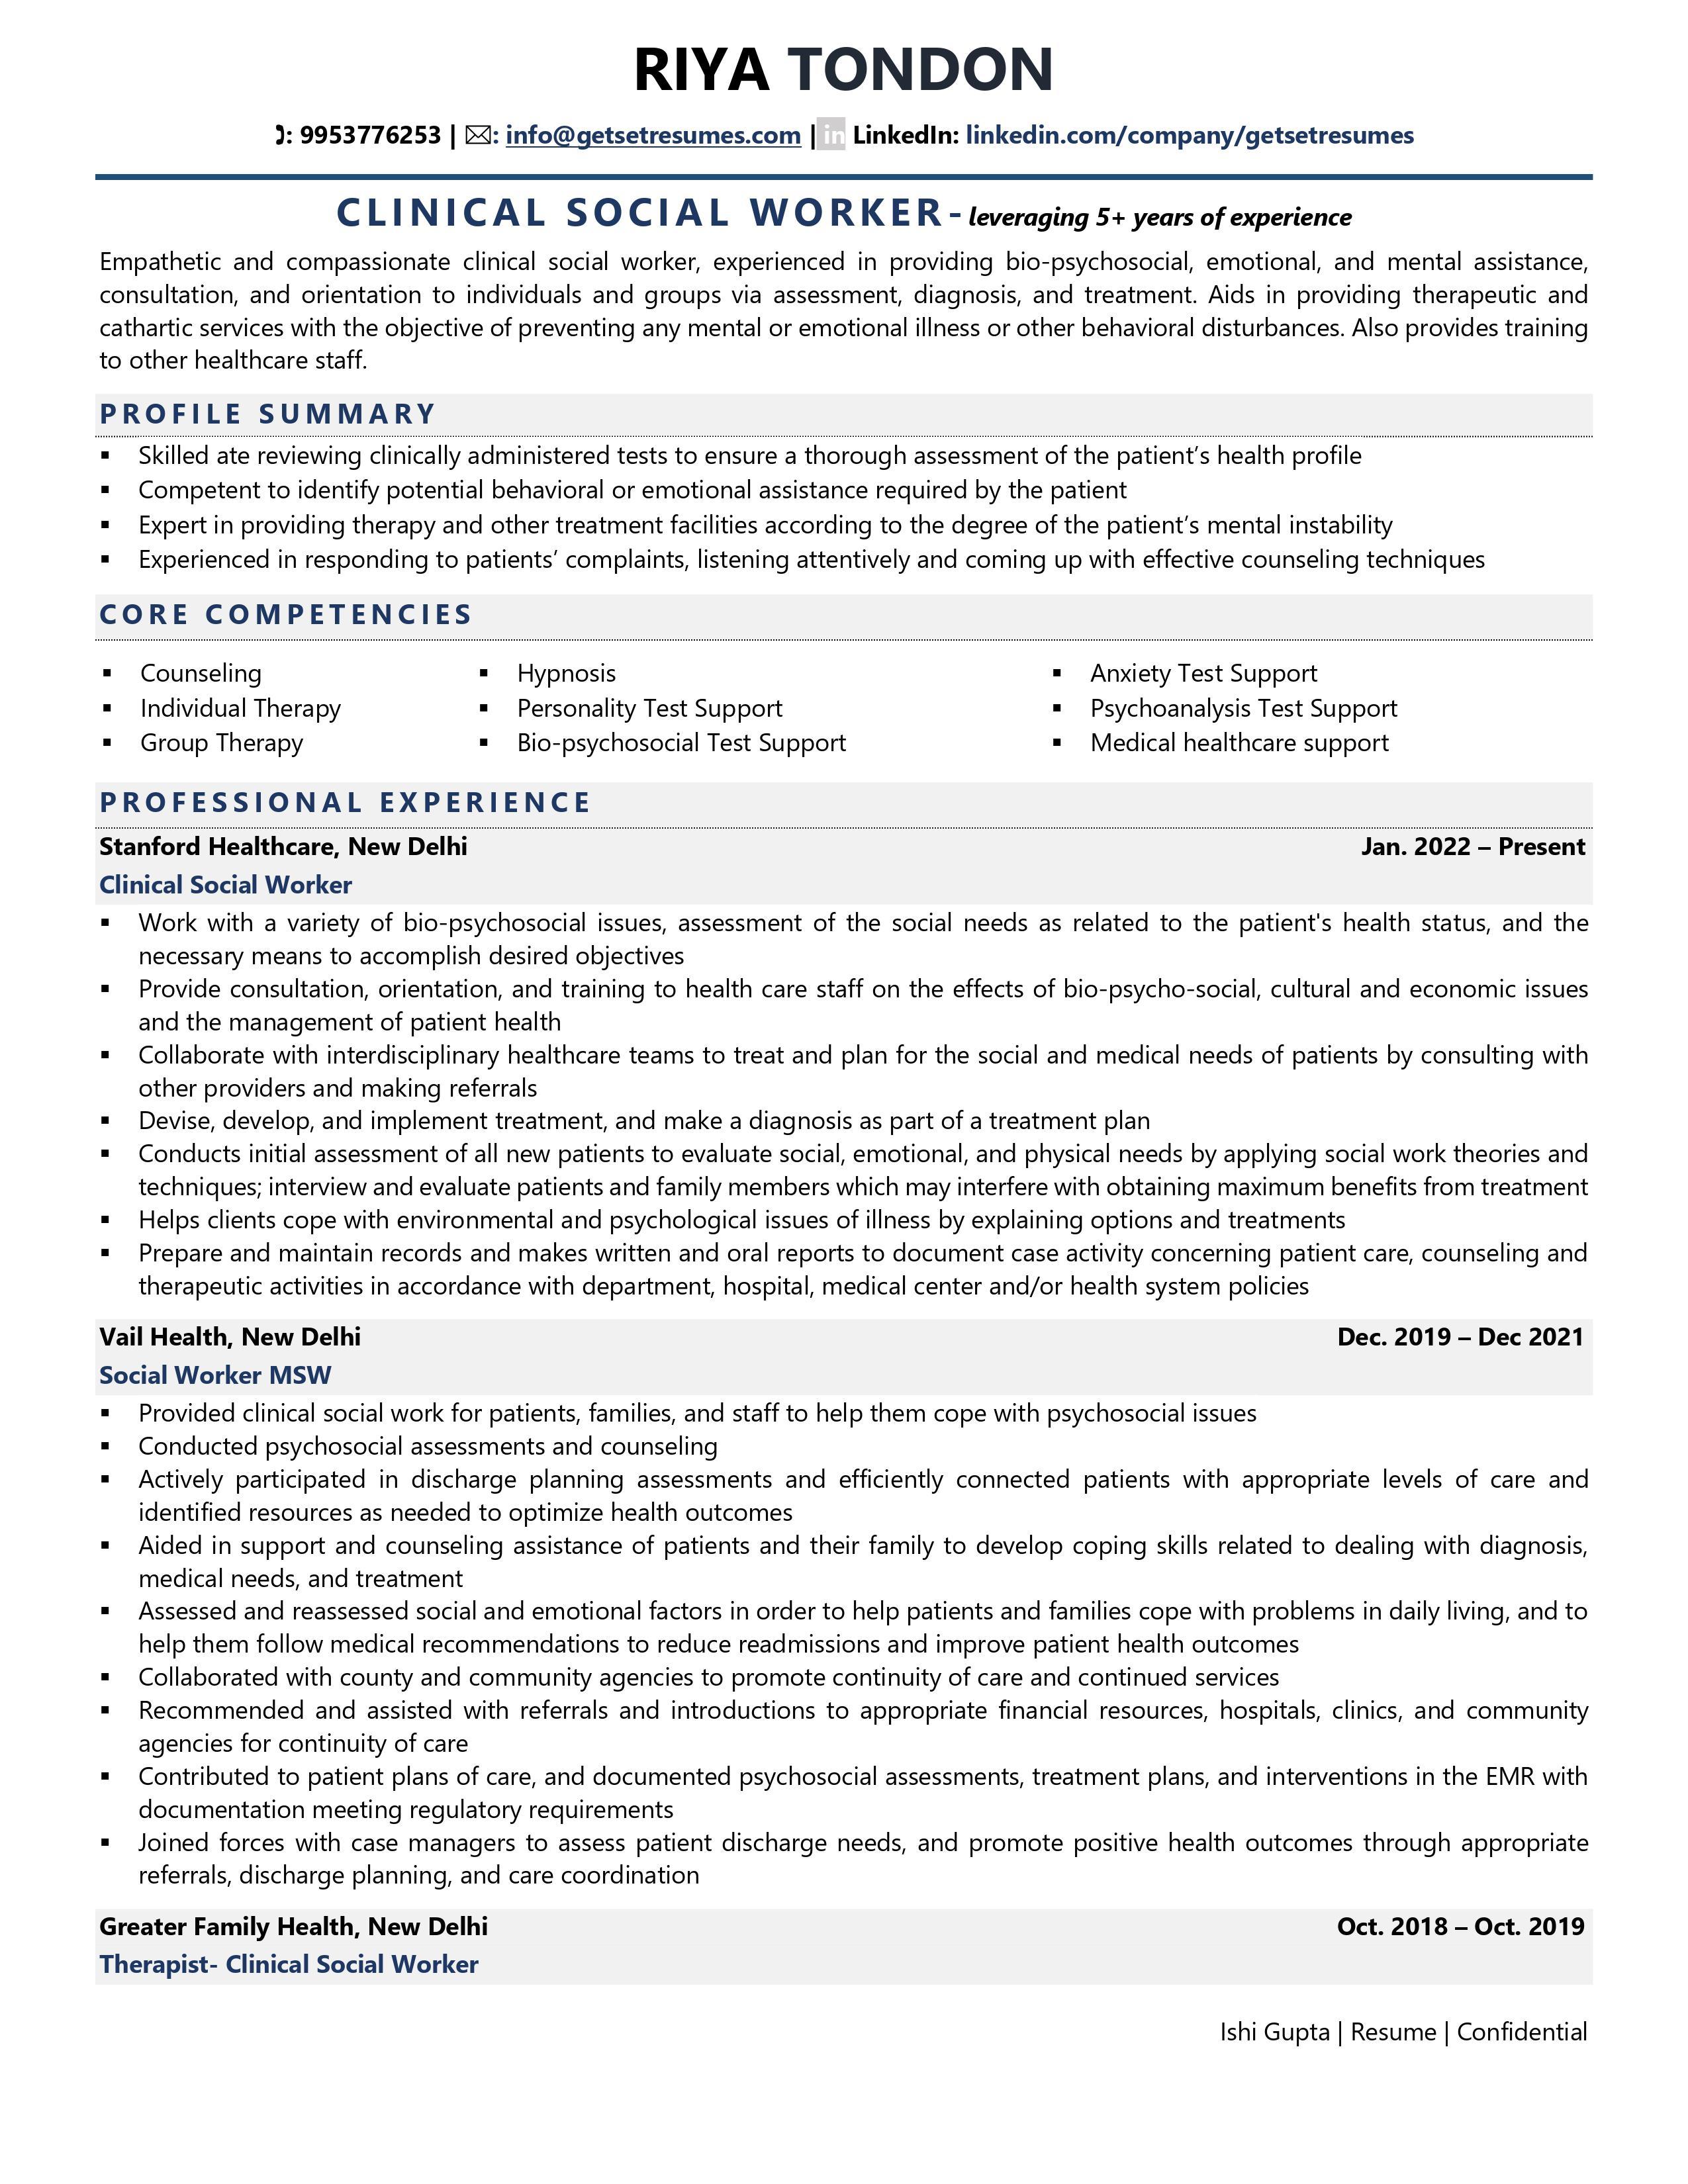 clinical social worker resume sample